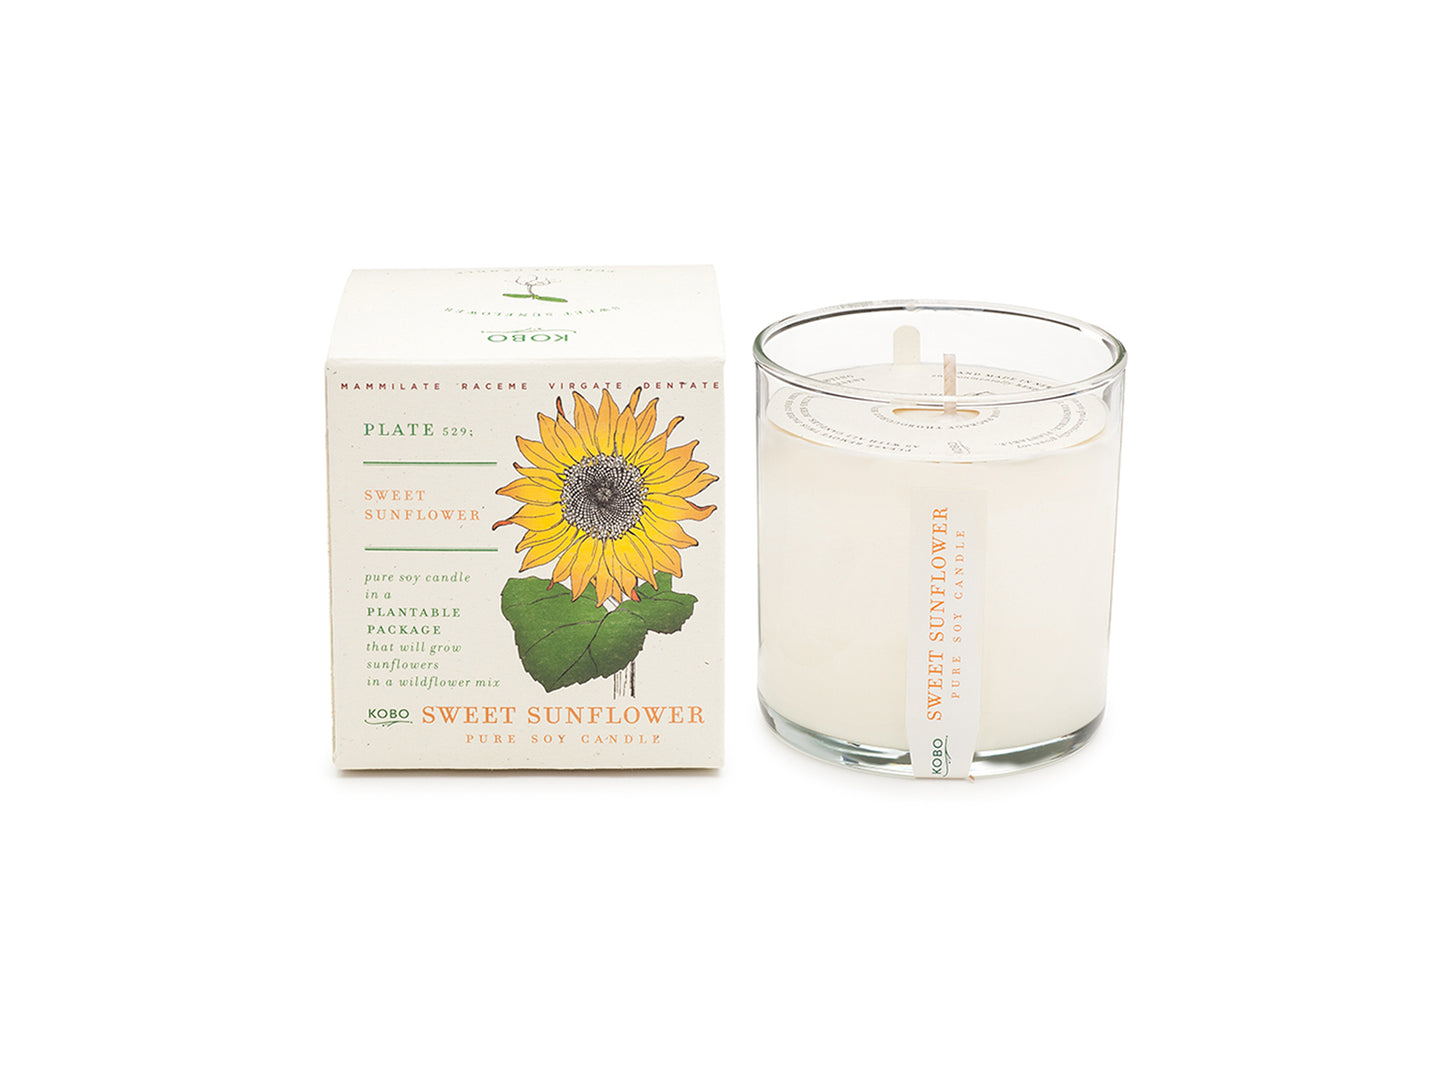 Sweet Sunflower Plant The Box 9 oz Candle